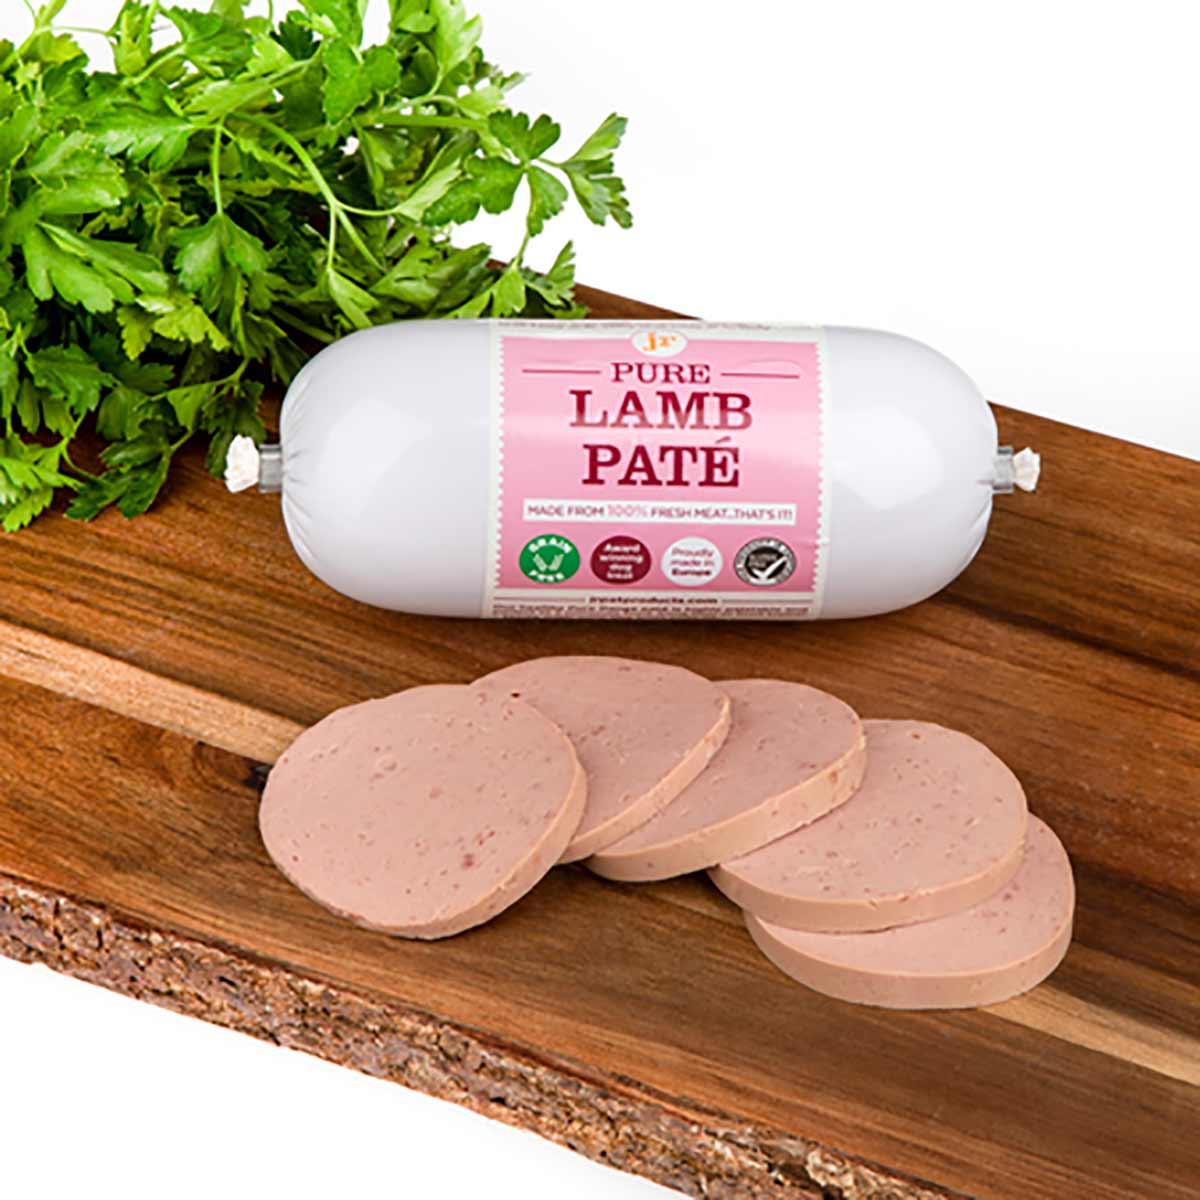 JR Pure Lamb Pate for Dogs